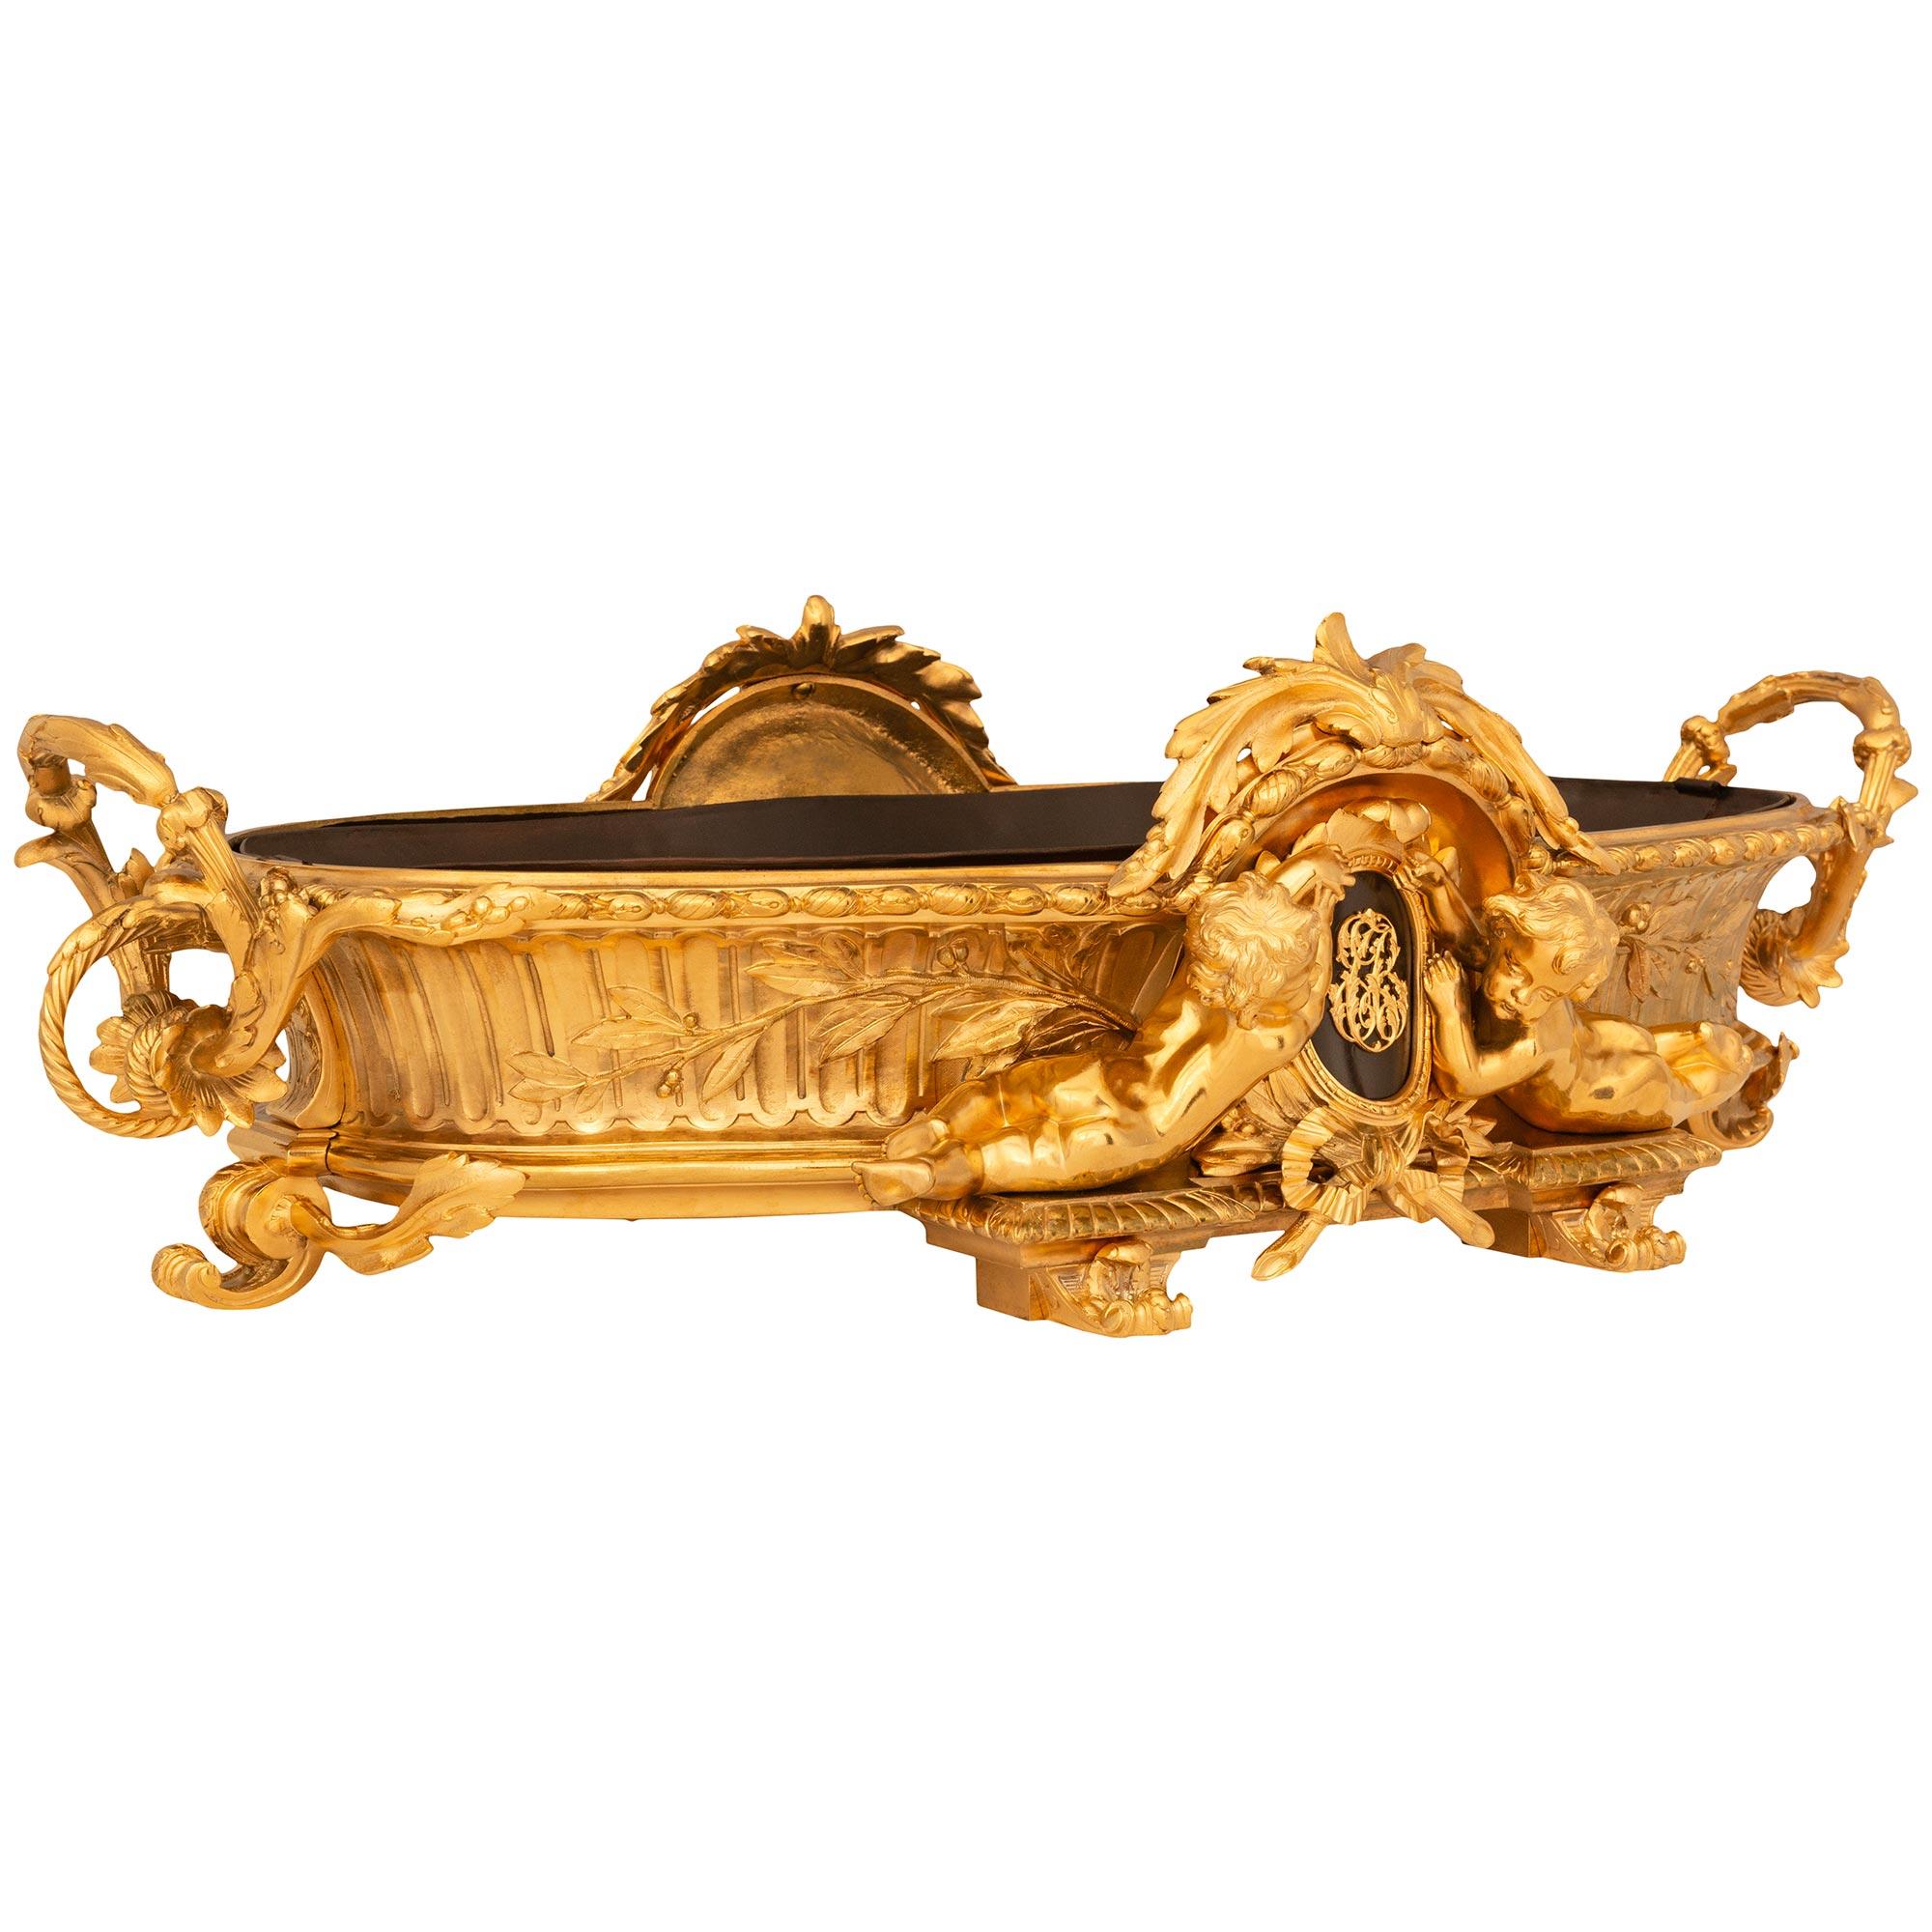 19th Century French 19th c. Napoleon III Period Ormolu, Patinated Bronze, & Tole Centerpiece For Sale